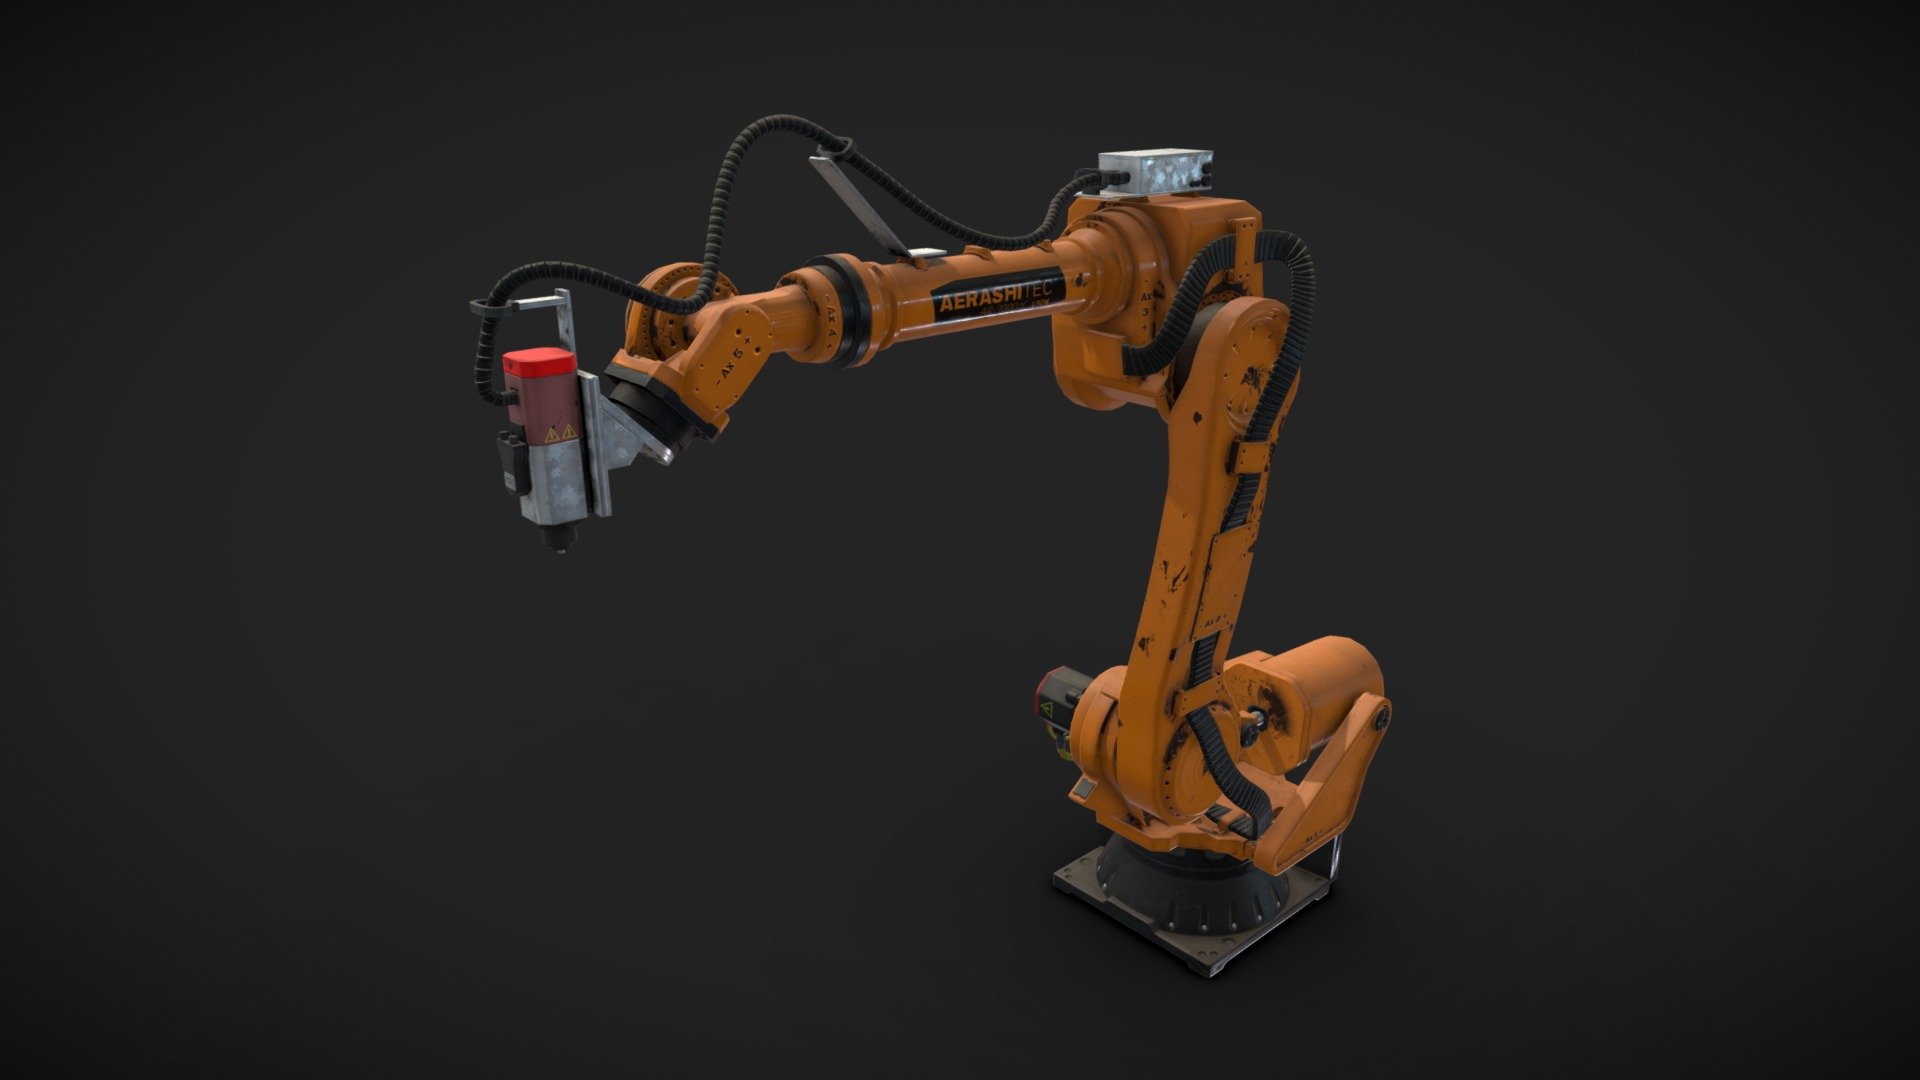 A robot arm 1mx2mx2m in size in it's most compact form and can reach about 6m fully extended 3d model